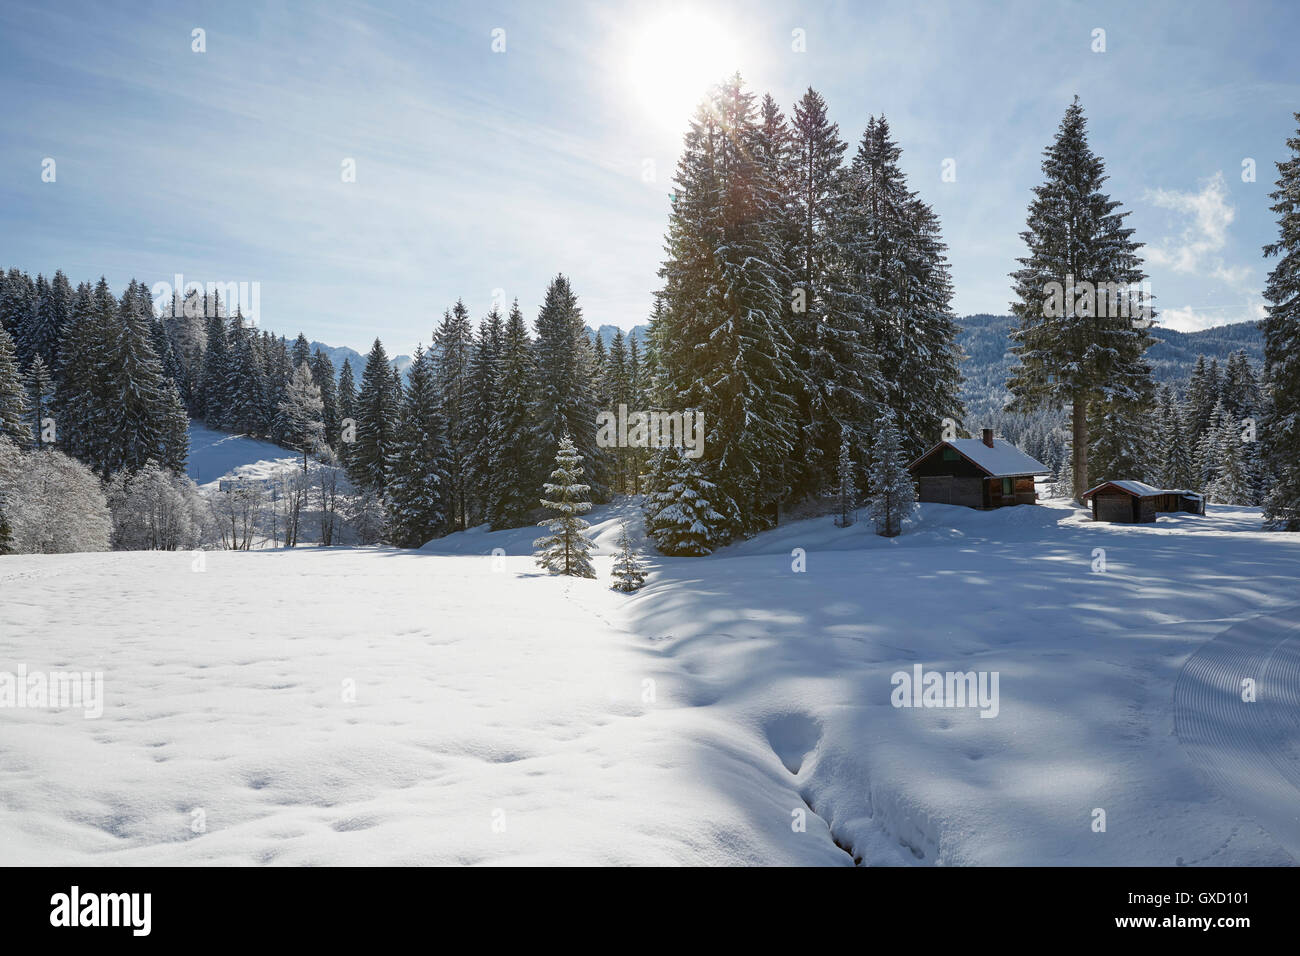 Fir trees and log cabin on snow covered landscape, Elmau, Bavaria, Germany Stock Photo